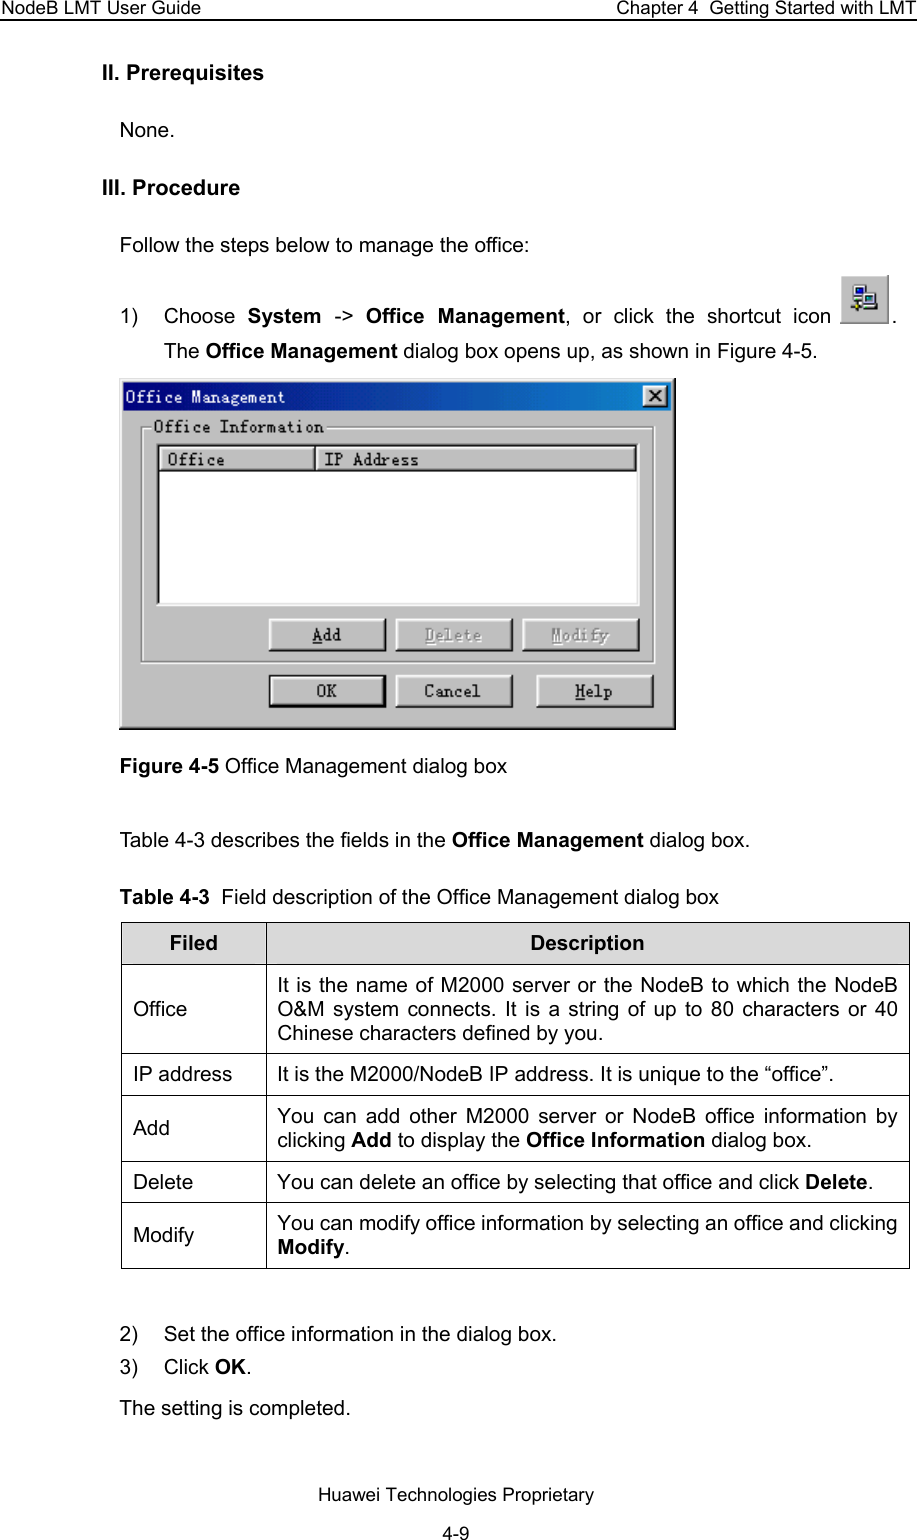 NodeB LMT User Guide  Chapter 4  Getting Started with LMT II. Prerequisites None. III. Procedure Follow the steps below to manage the office:  1) Choose System  -&gt;  Office Management, or click the shortcut icon  .  The Office Management dialog box opens up, as shown in Figure 4-5.  Figure 4-5 Office Management dialog box Table 4-3 describes the fields in the Office Management dialog box.  Table 4-3  Field description of the Office Management dialog box Filed   Description  Office  It is the name of M2000 server or the NodeB to which the NodeB O&amp;M system connects. It is a string of up to 80 characters or 40 Chinese characters defined by you.  IP address   It is the M2000/NodeB IP address. It is unique to the “office”.  Add   You can add other M2000 server or NodeB office information by clicking Add to display the Office Information dialog box. Delete   You can delete an office by selecting that office and click Delete.  Modify   You can modify office information by selecting an office and clicking Modify.   2)  Set the office information in the dialog box.  3) Click OK.  The setting is completed.  Huawei Technologies Proprietary 4-9 